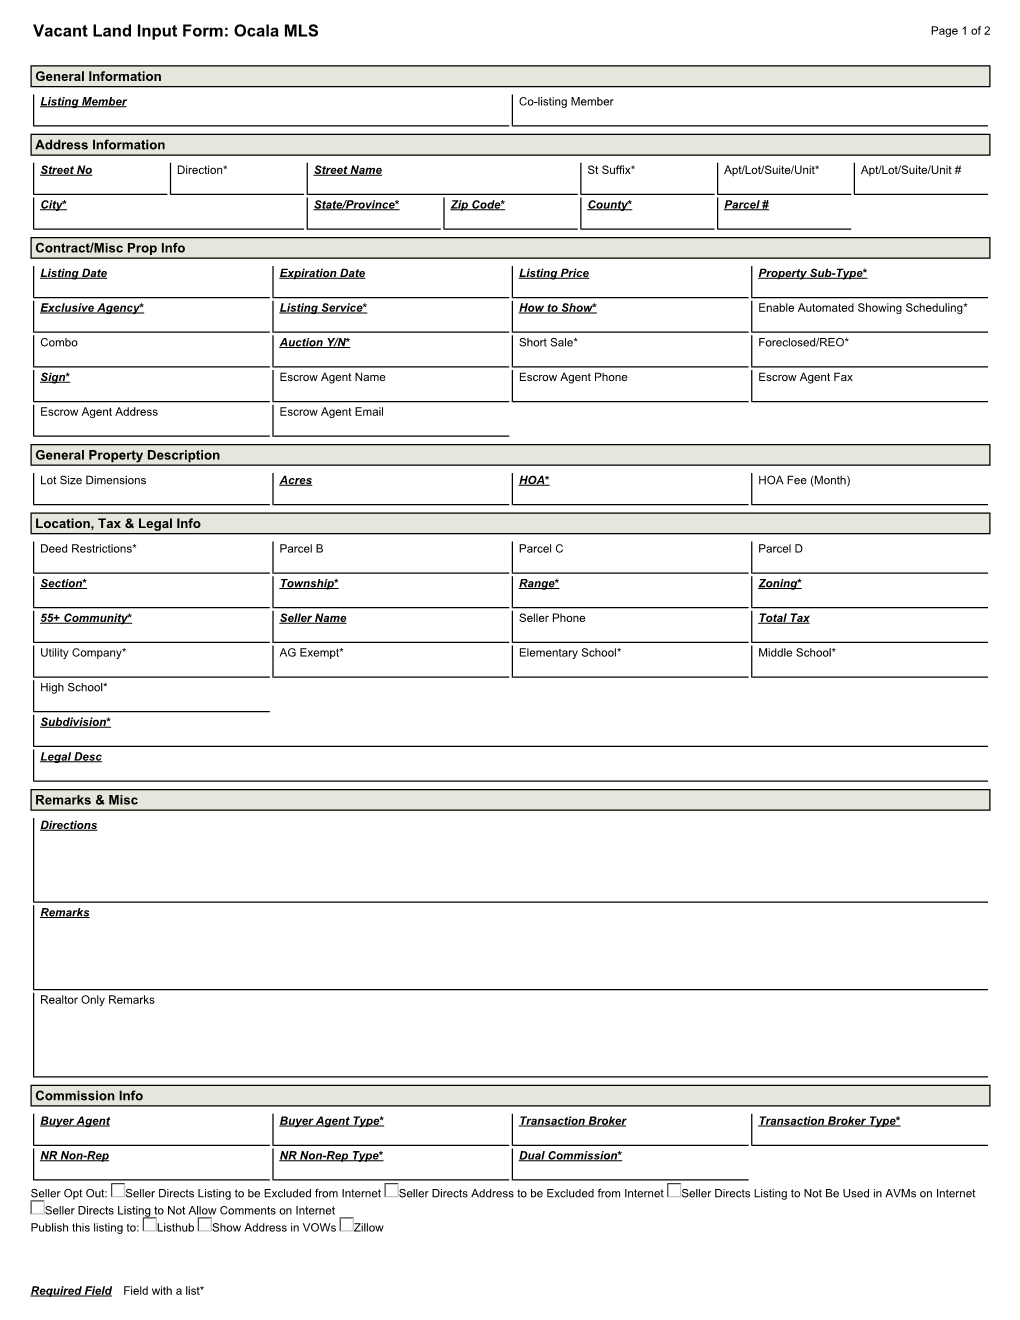 Vacant Land Input Form: Ocala MLS Page 1 of 2